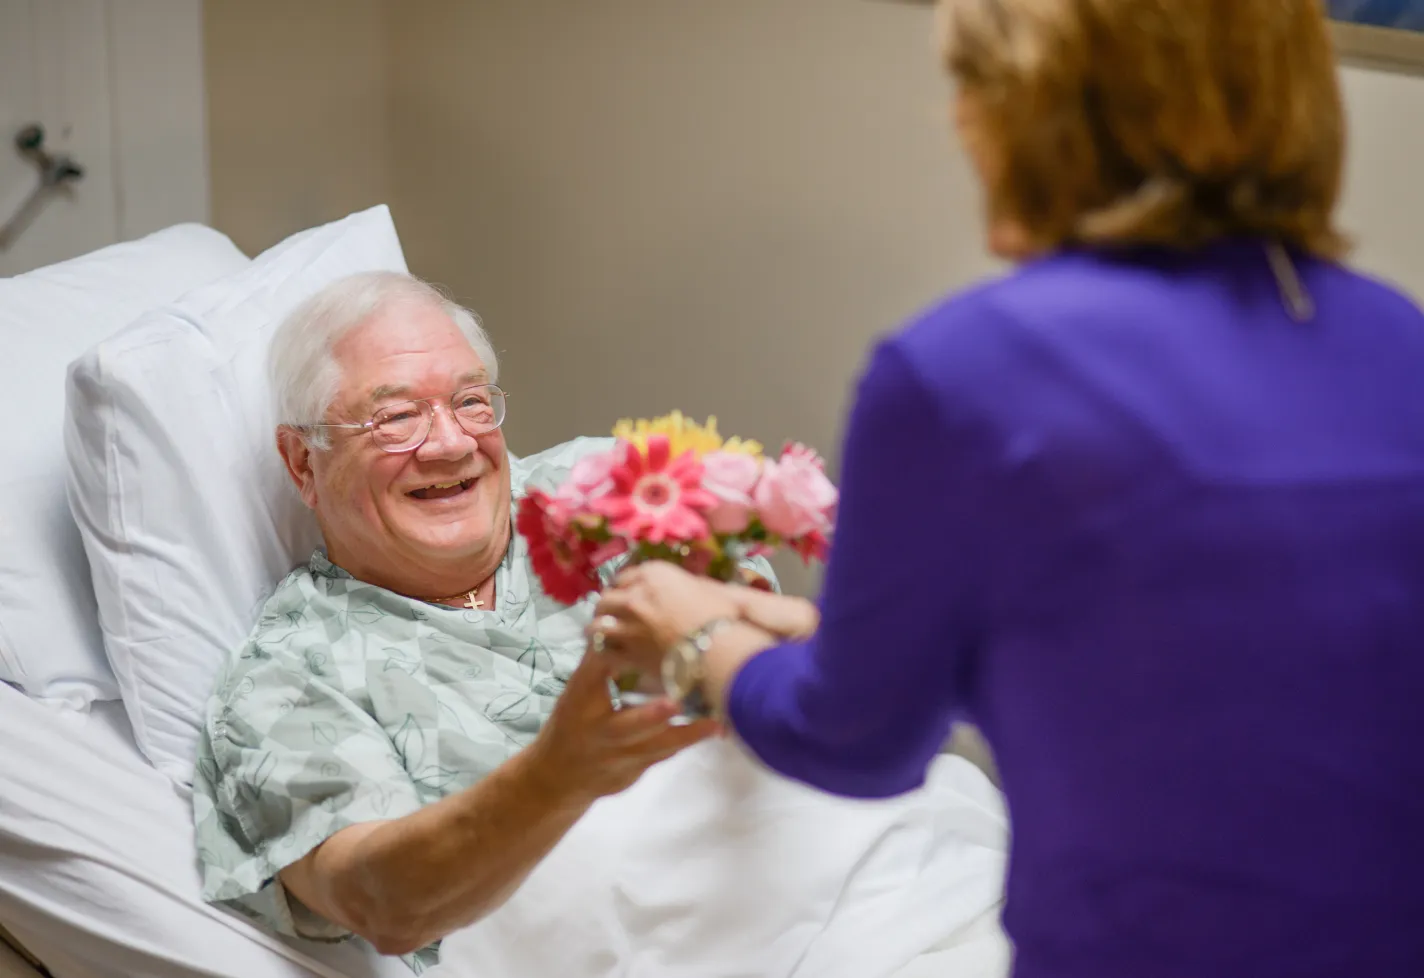 A Novant Health volunteer is delivering flowers to a patient who is lying down in a hospital bed.